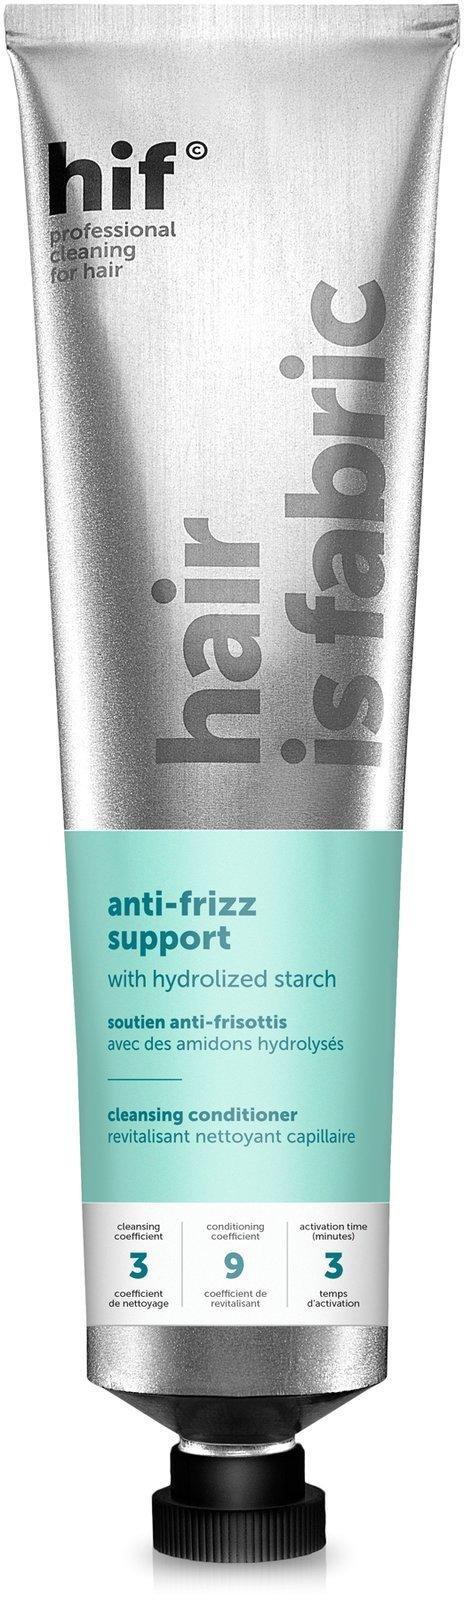 Hif Cleansing Conditioner - Anti-frizz Support - 6.08 Oz